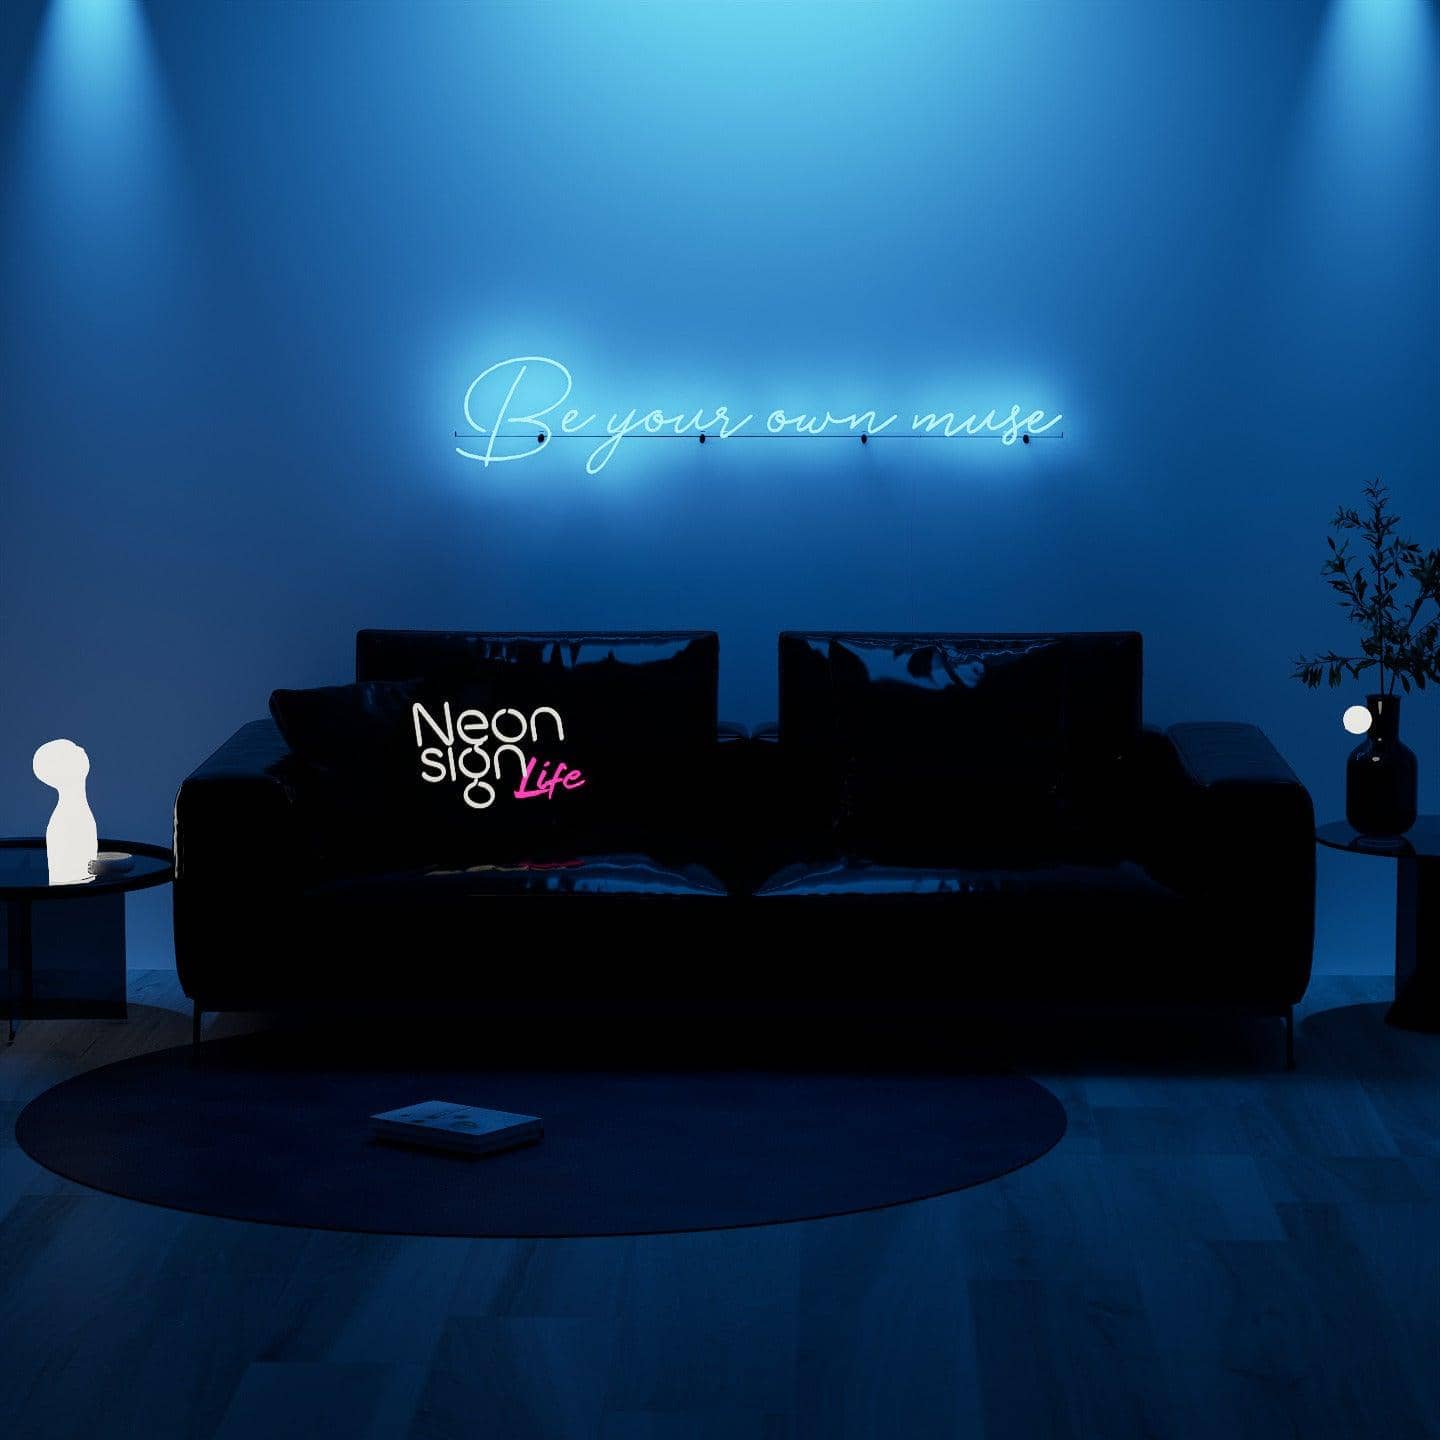 dark-night-lit-blue-neon-lights-hanging-on-the-wall-for-display-be-your-own-muse